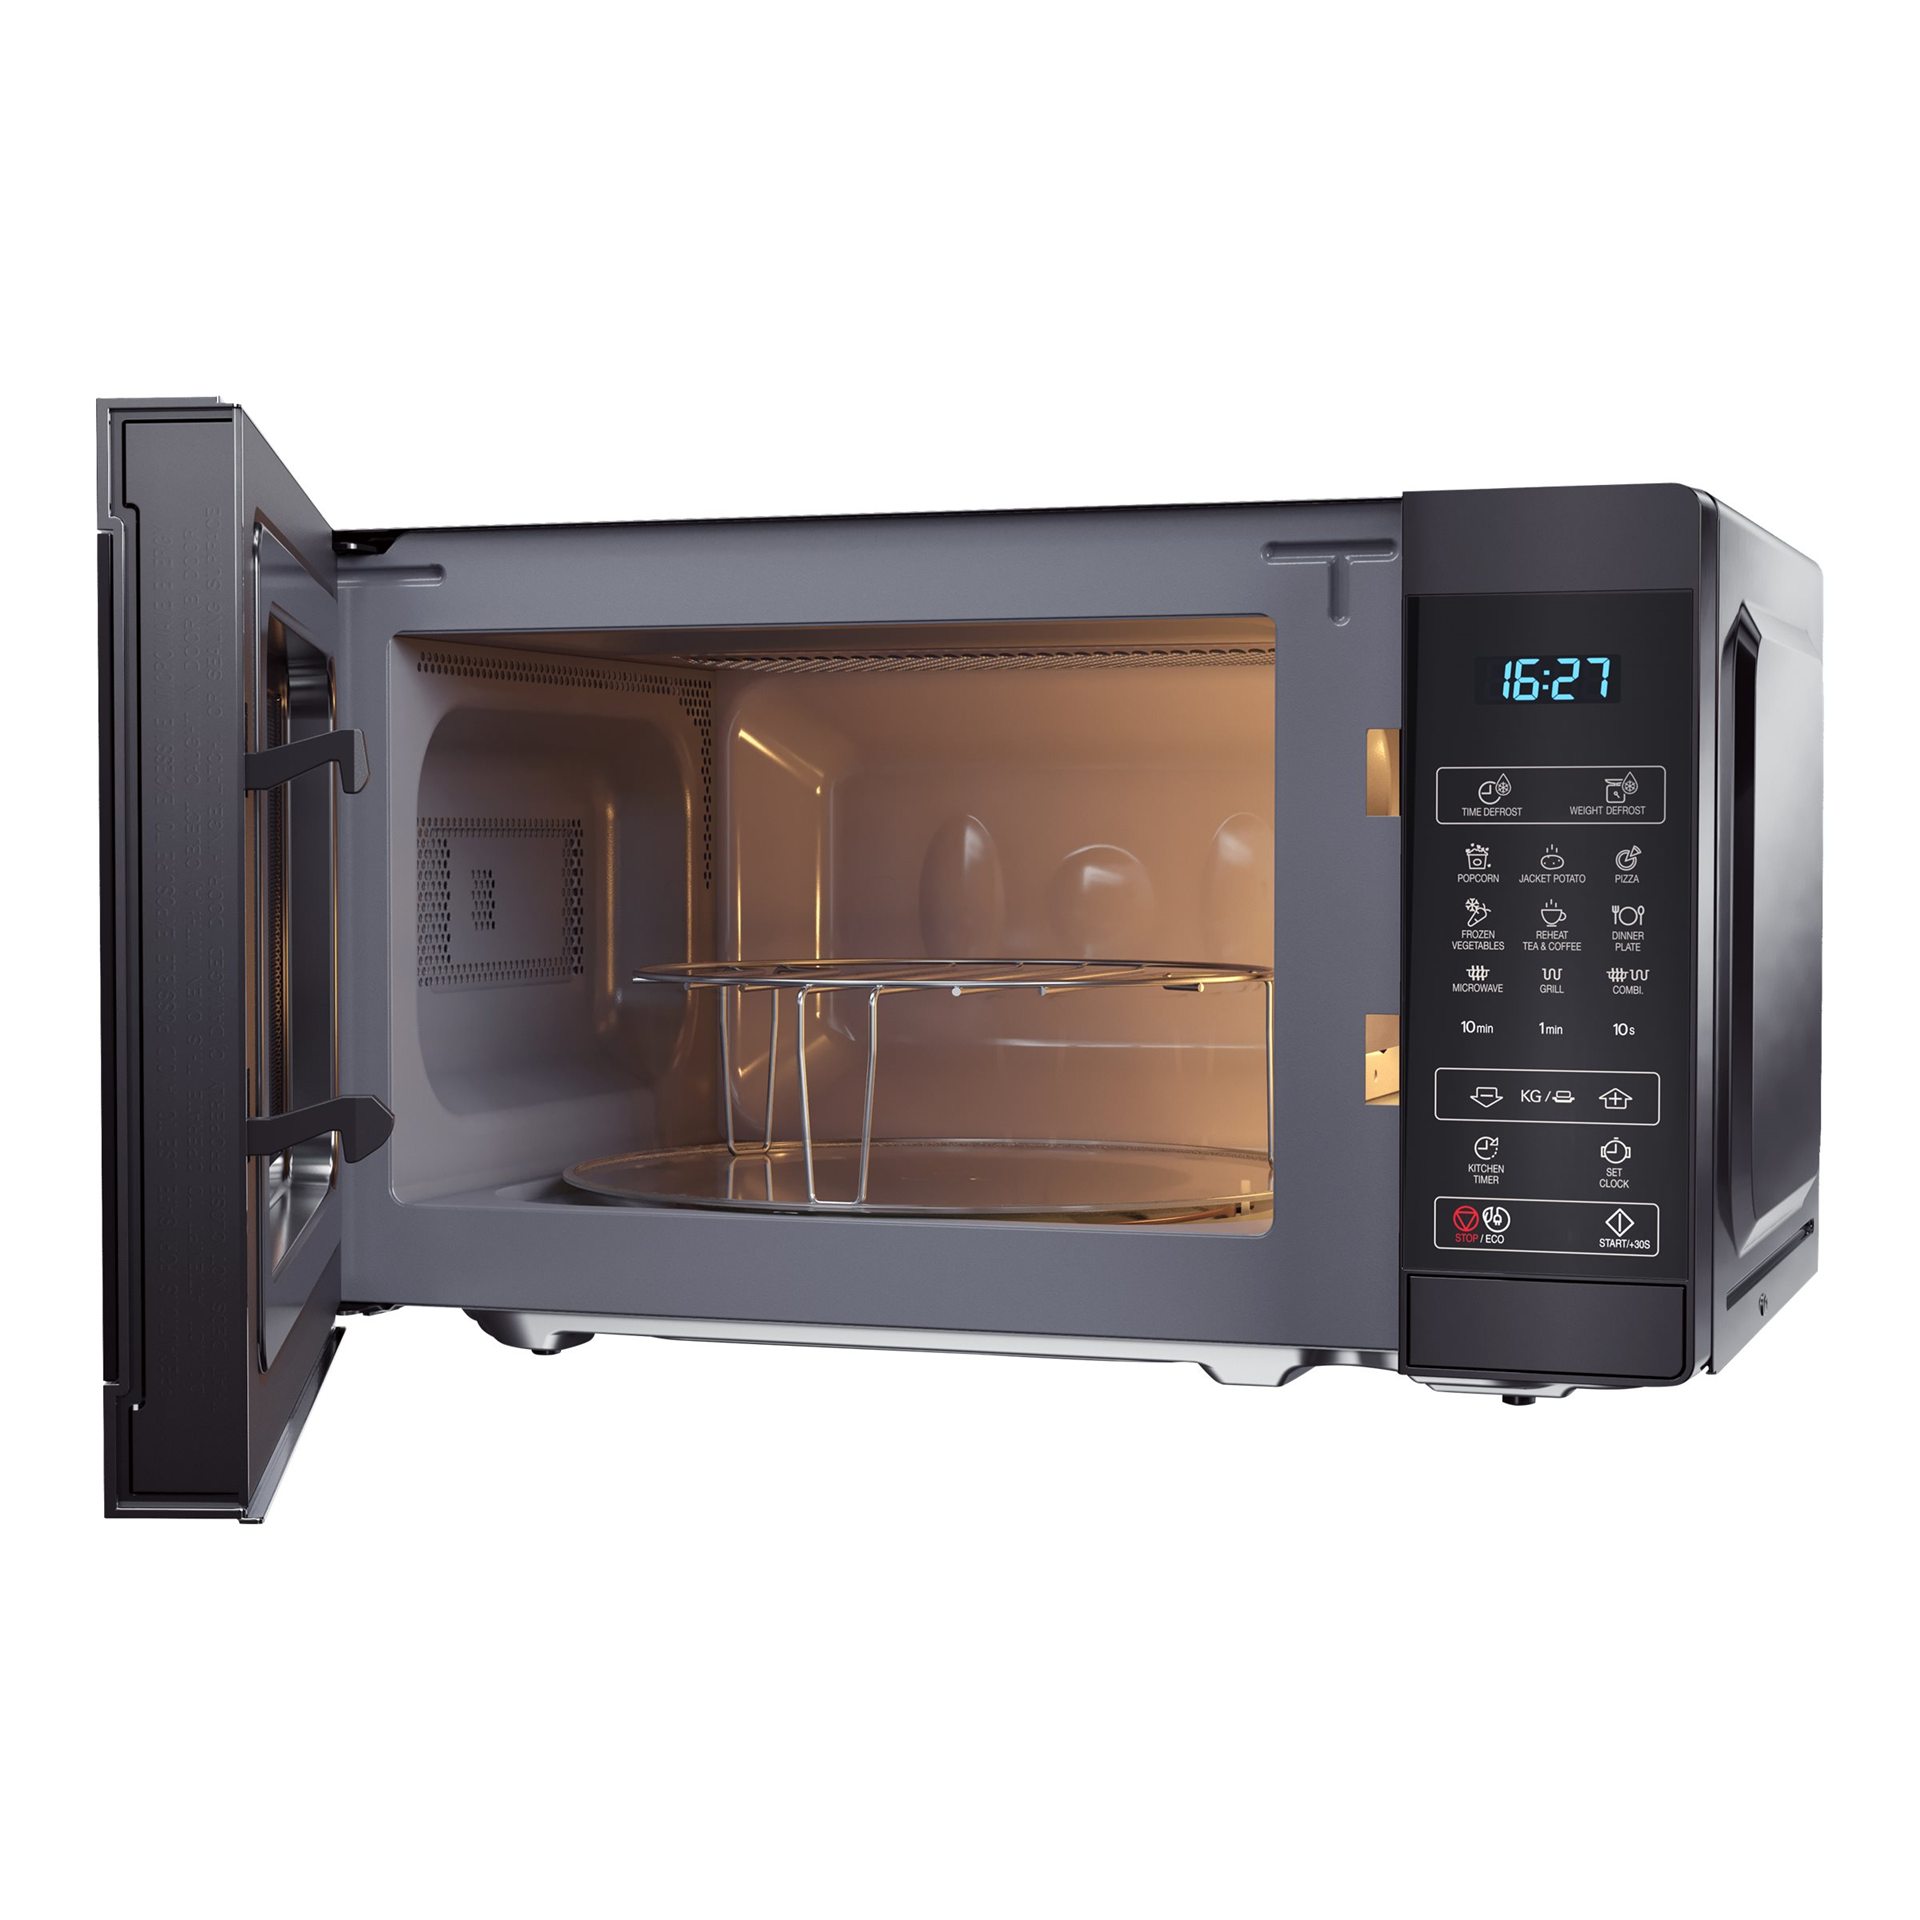 Sharp Microwave Oven with Grill YC-MG02E-B Free standing 800 W Grill Black